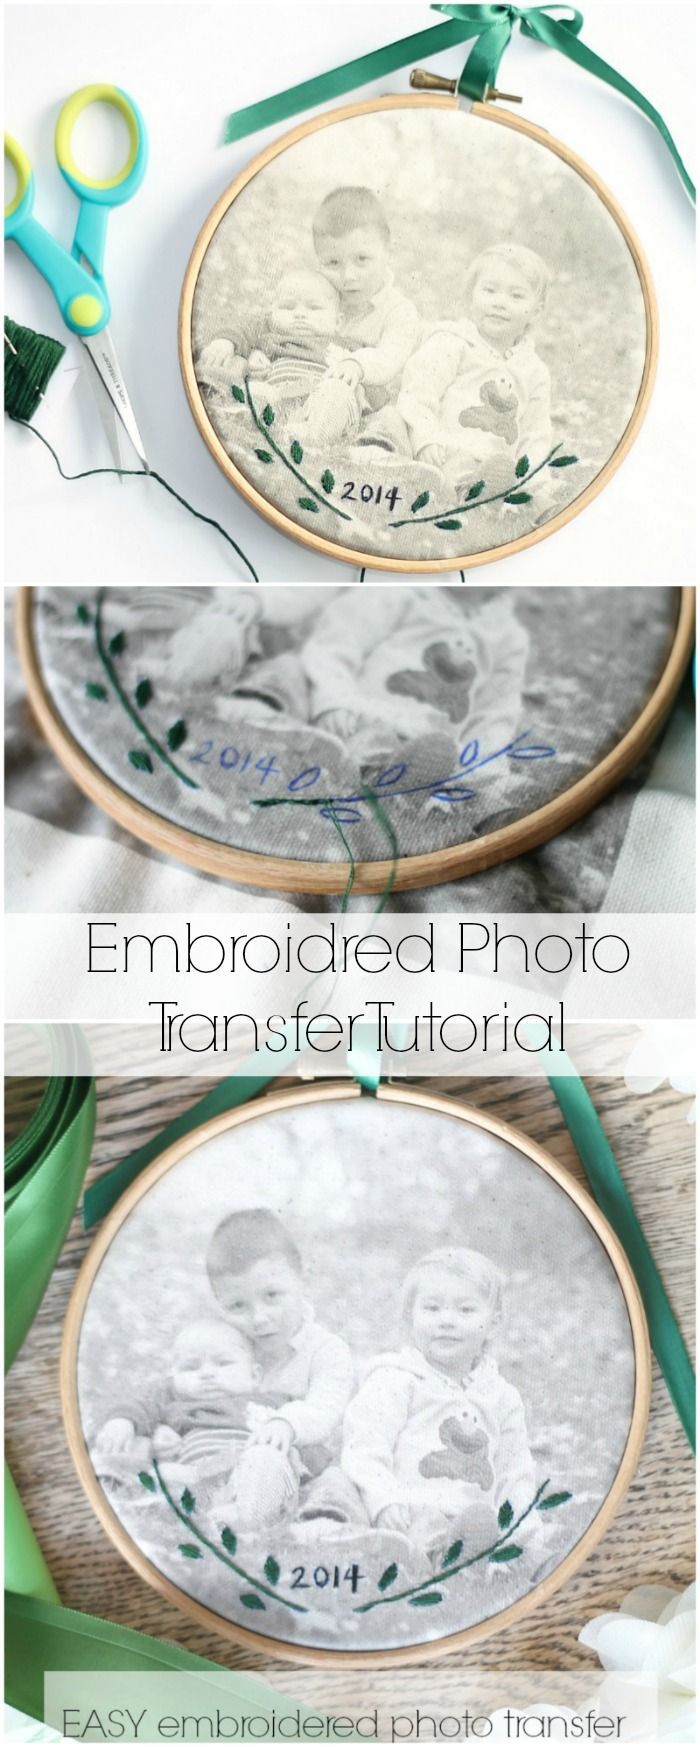 Embroidered Photo Transfer | Catholic Sprouts -   18 diy projects Wedding photo transfer ideas